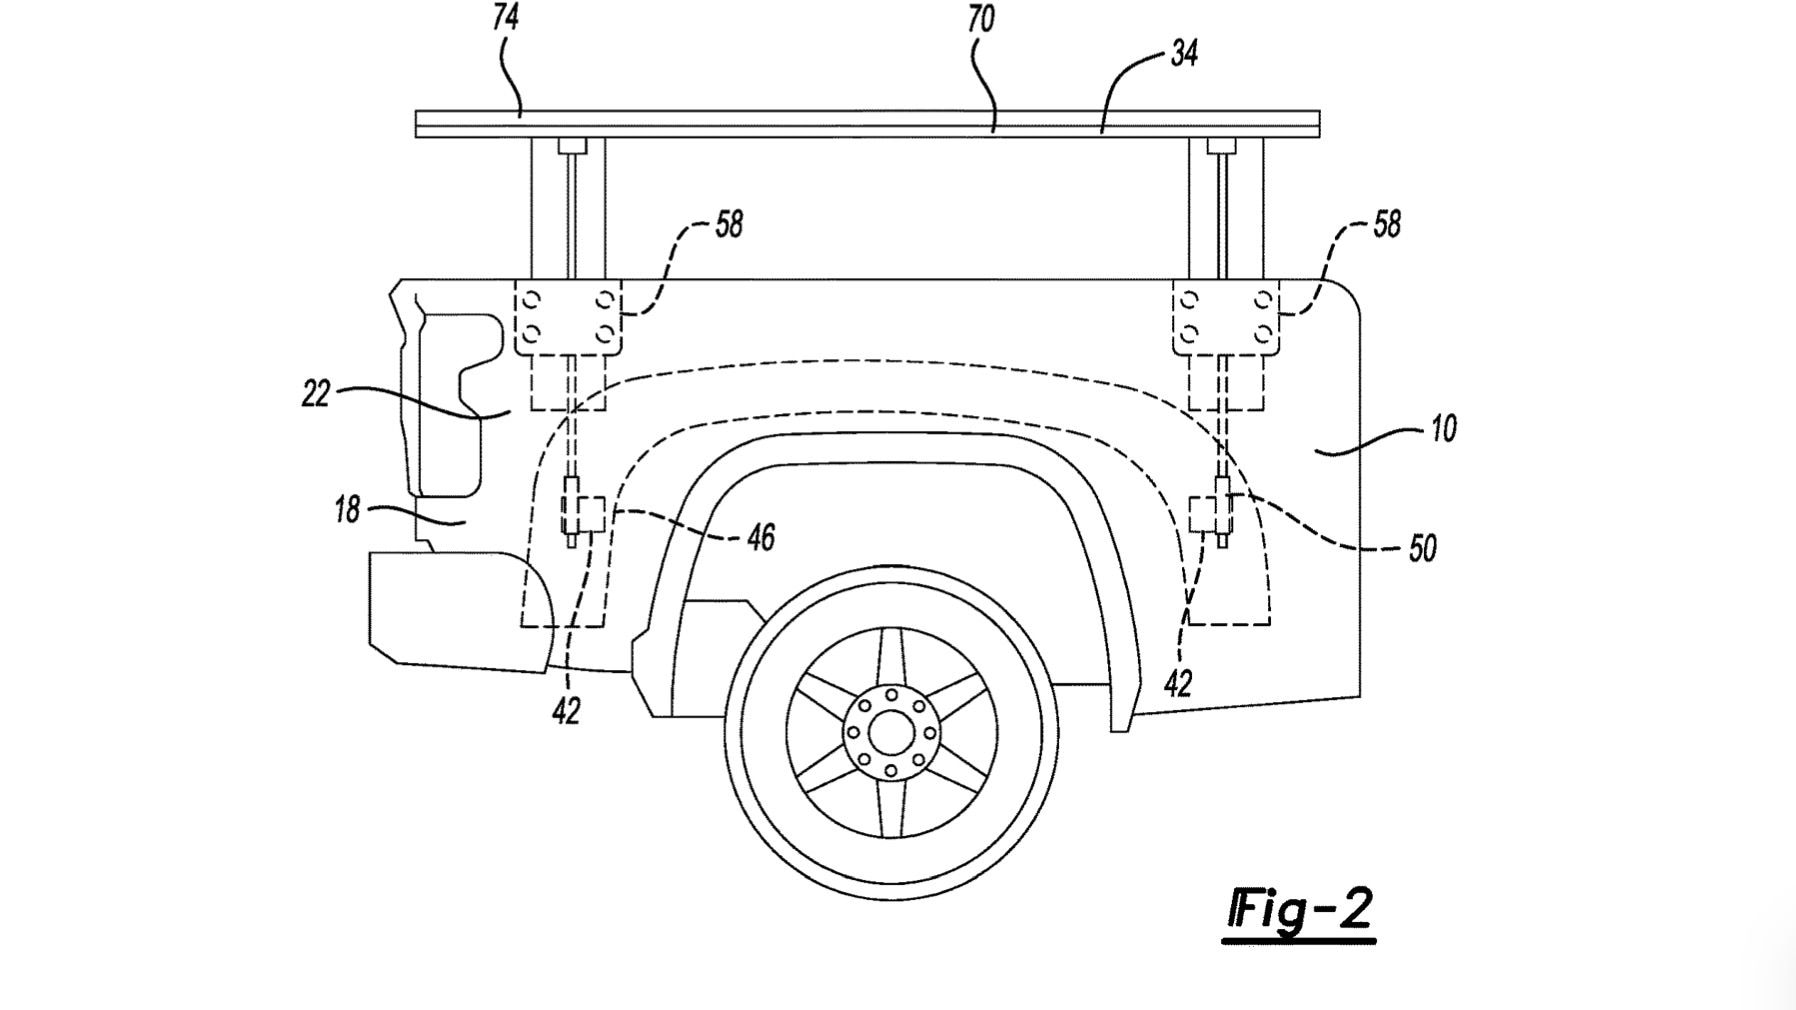 Ford pop-up bed rail system patent image